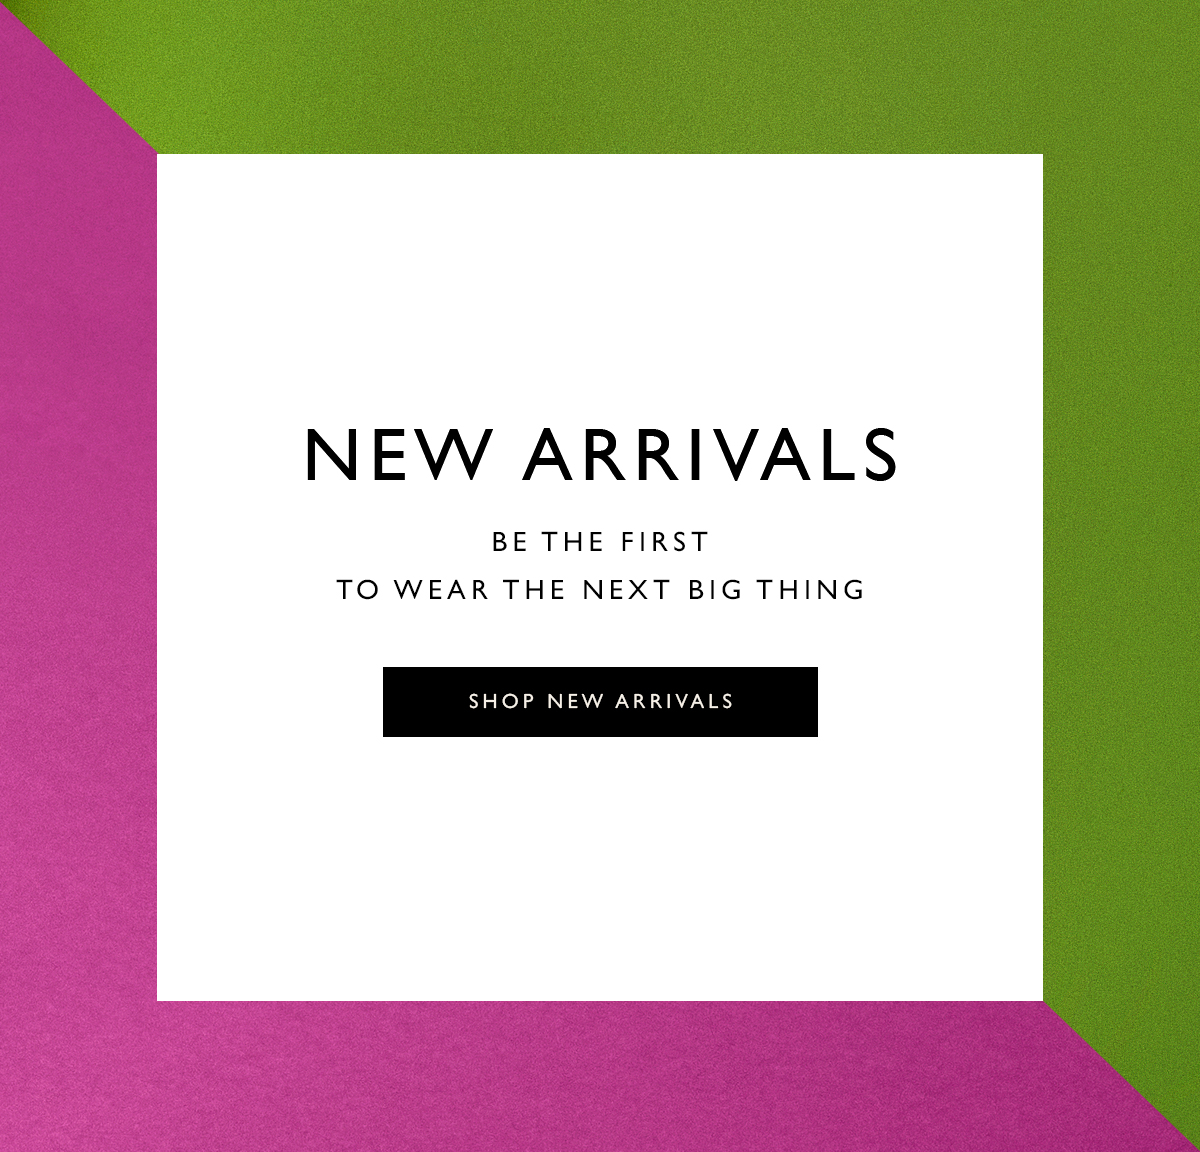 New Arrivals. Be the first to wear the next big thing. Shop New Arrivals.